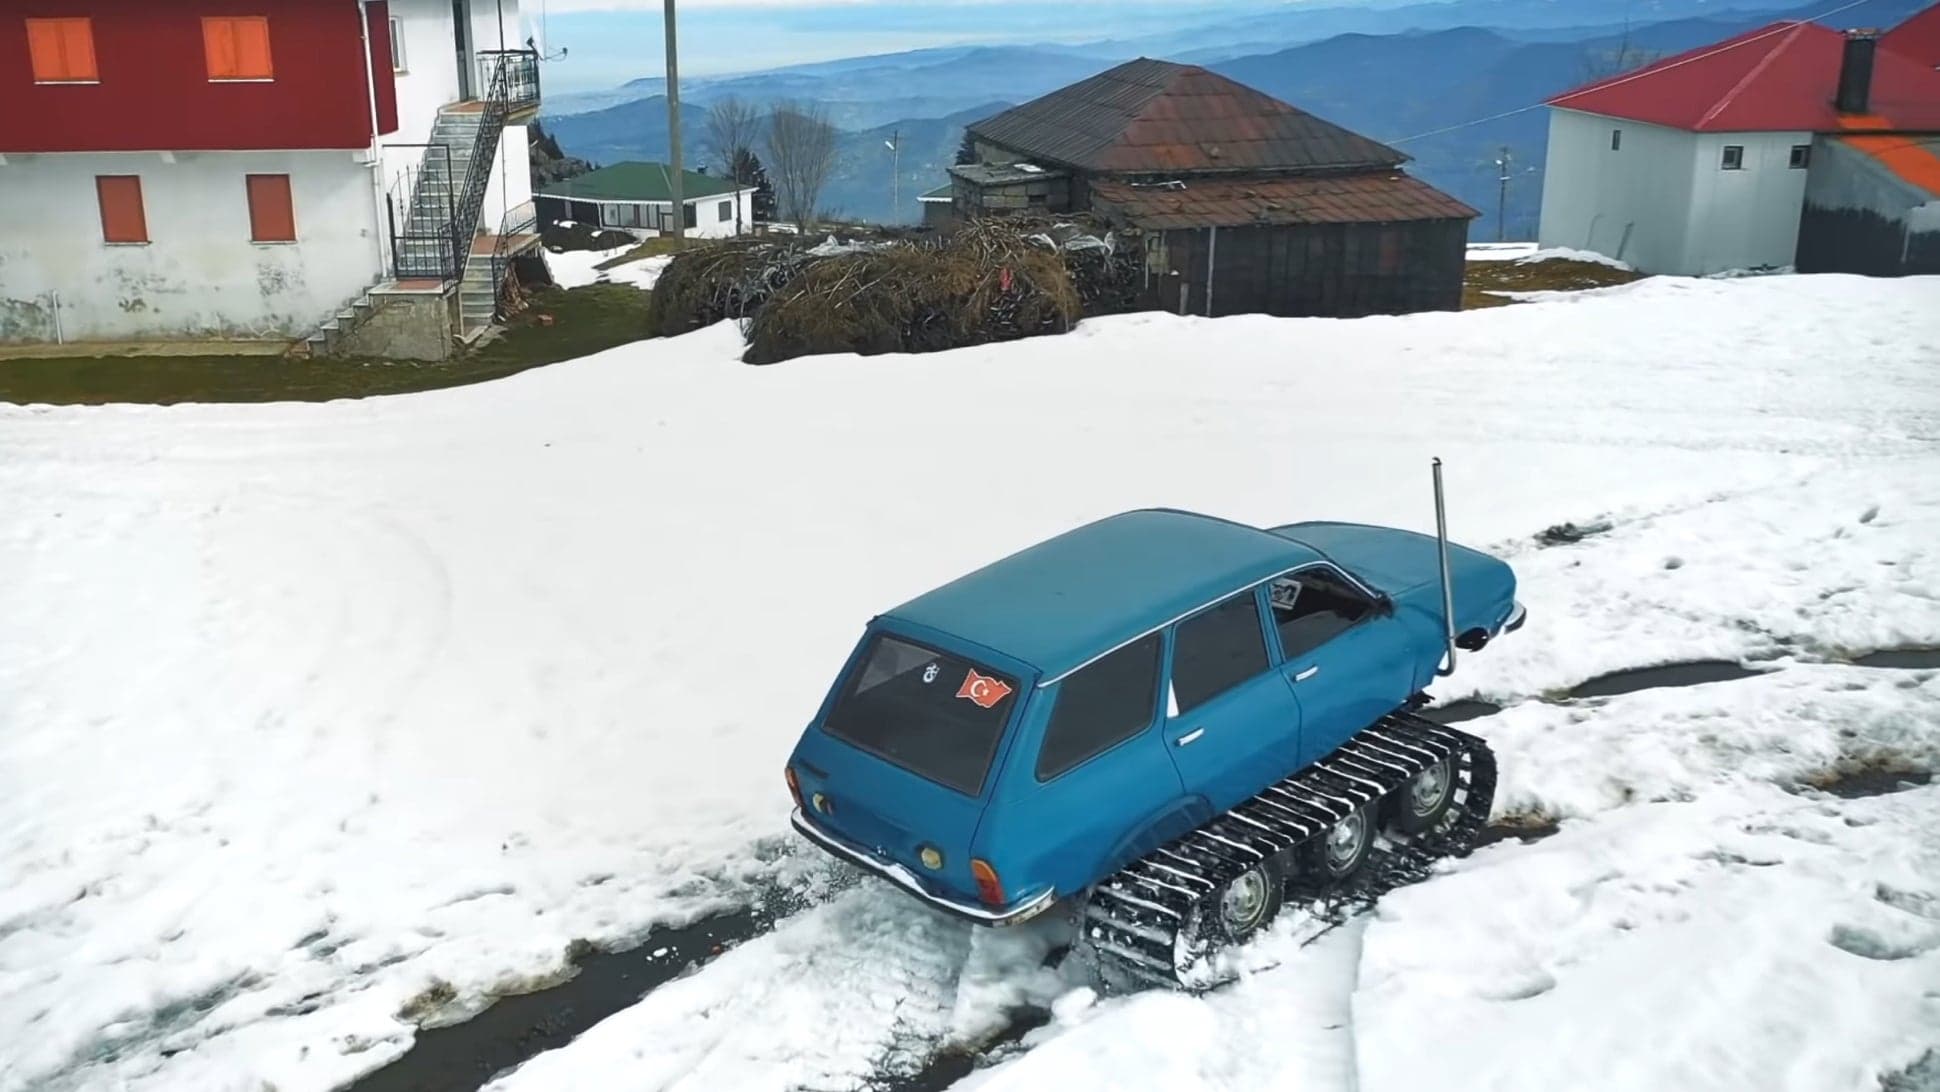 1977 Renault 12 With Off-Road Tracks Is the Winter Beater of Your Dreams